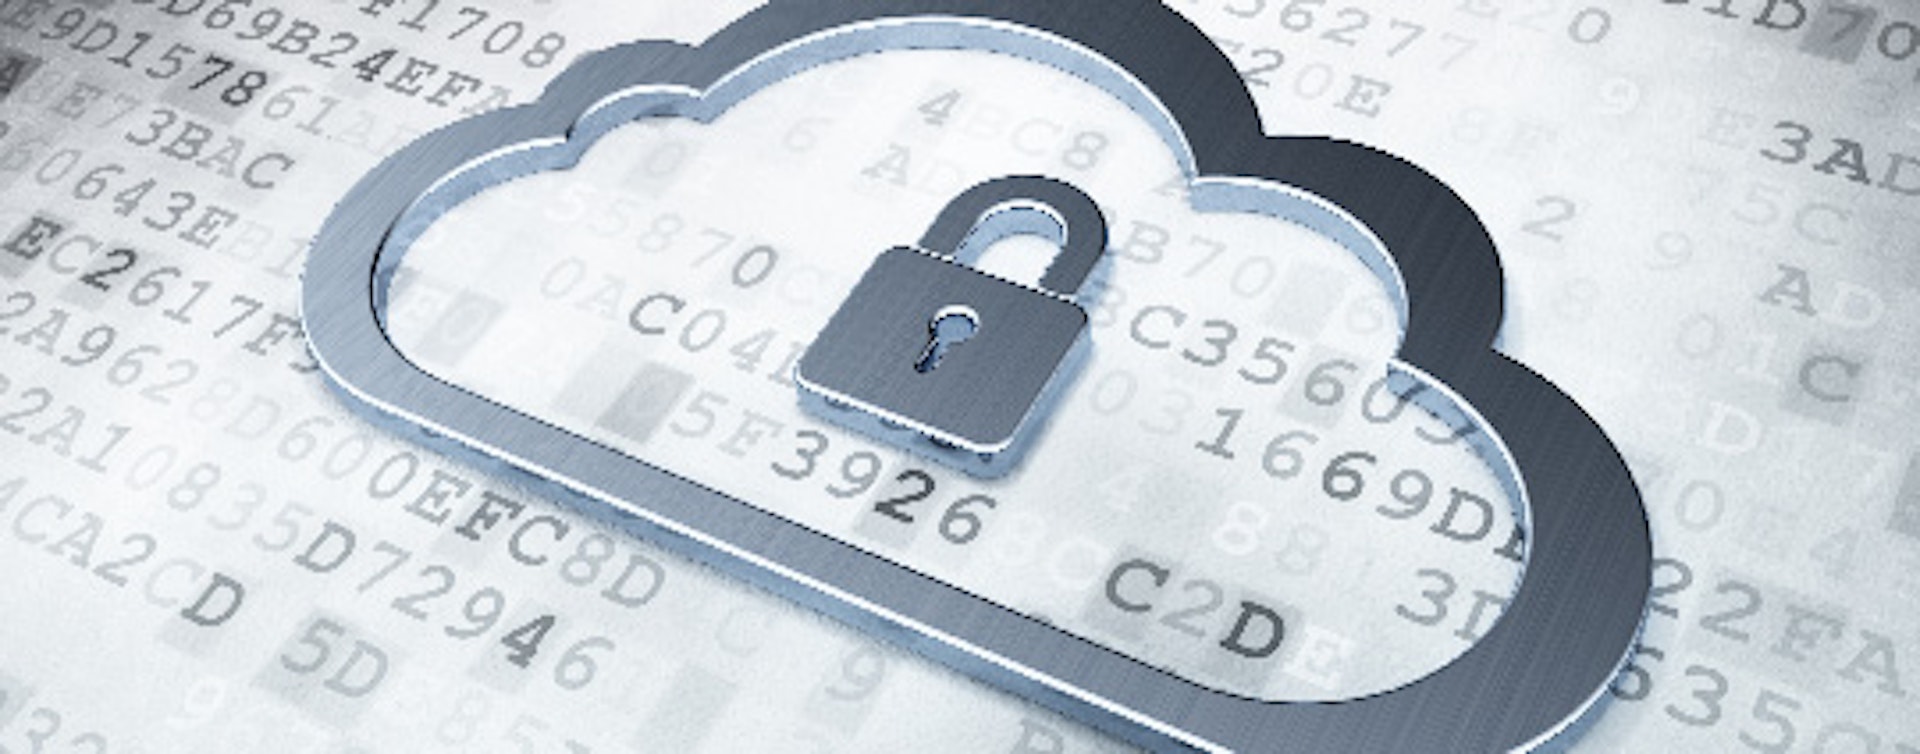 Cloud security is changing the security channel partner model